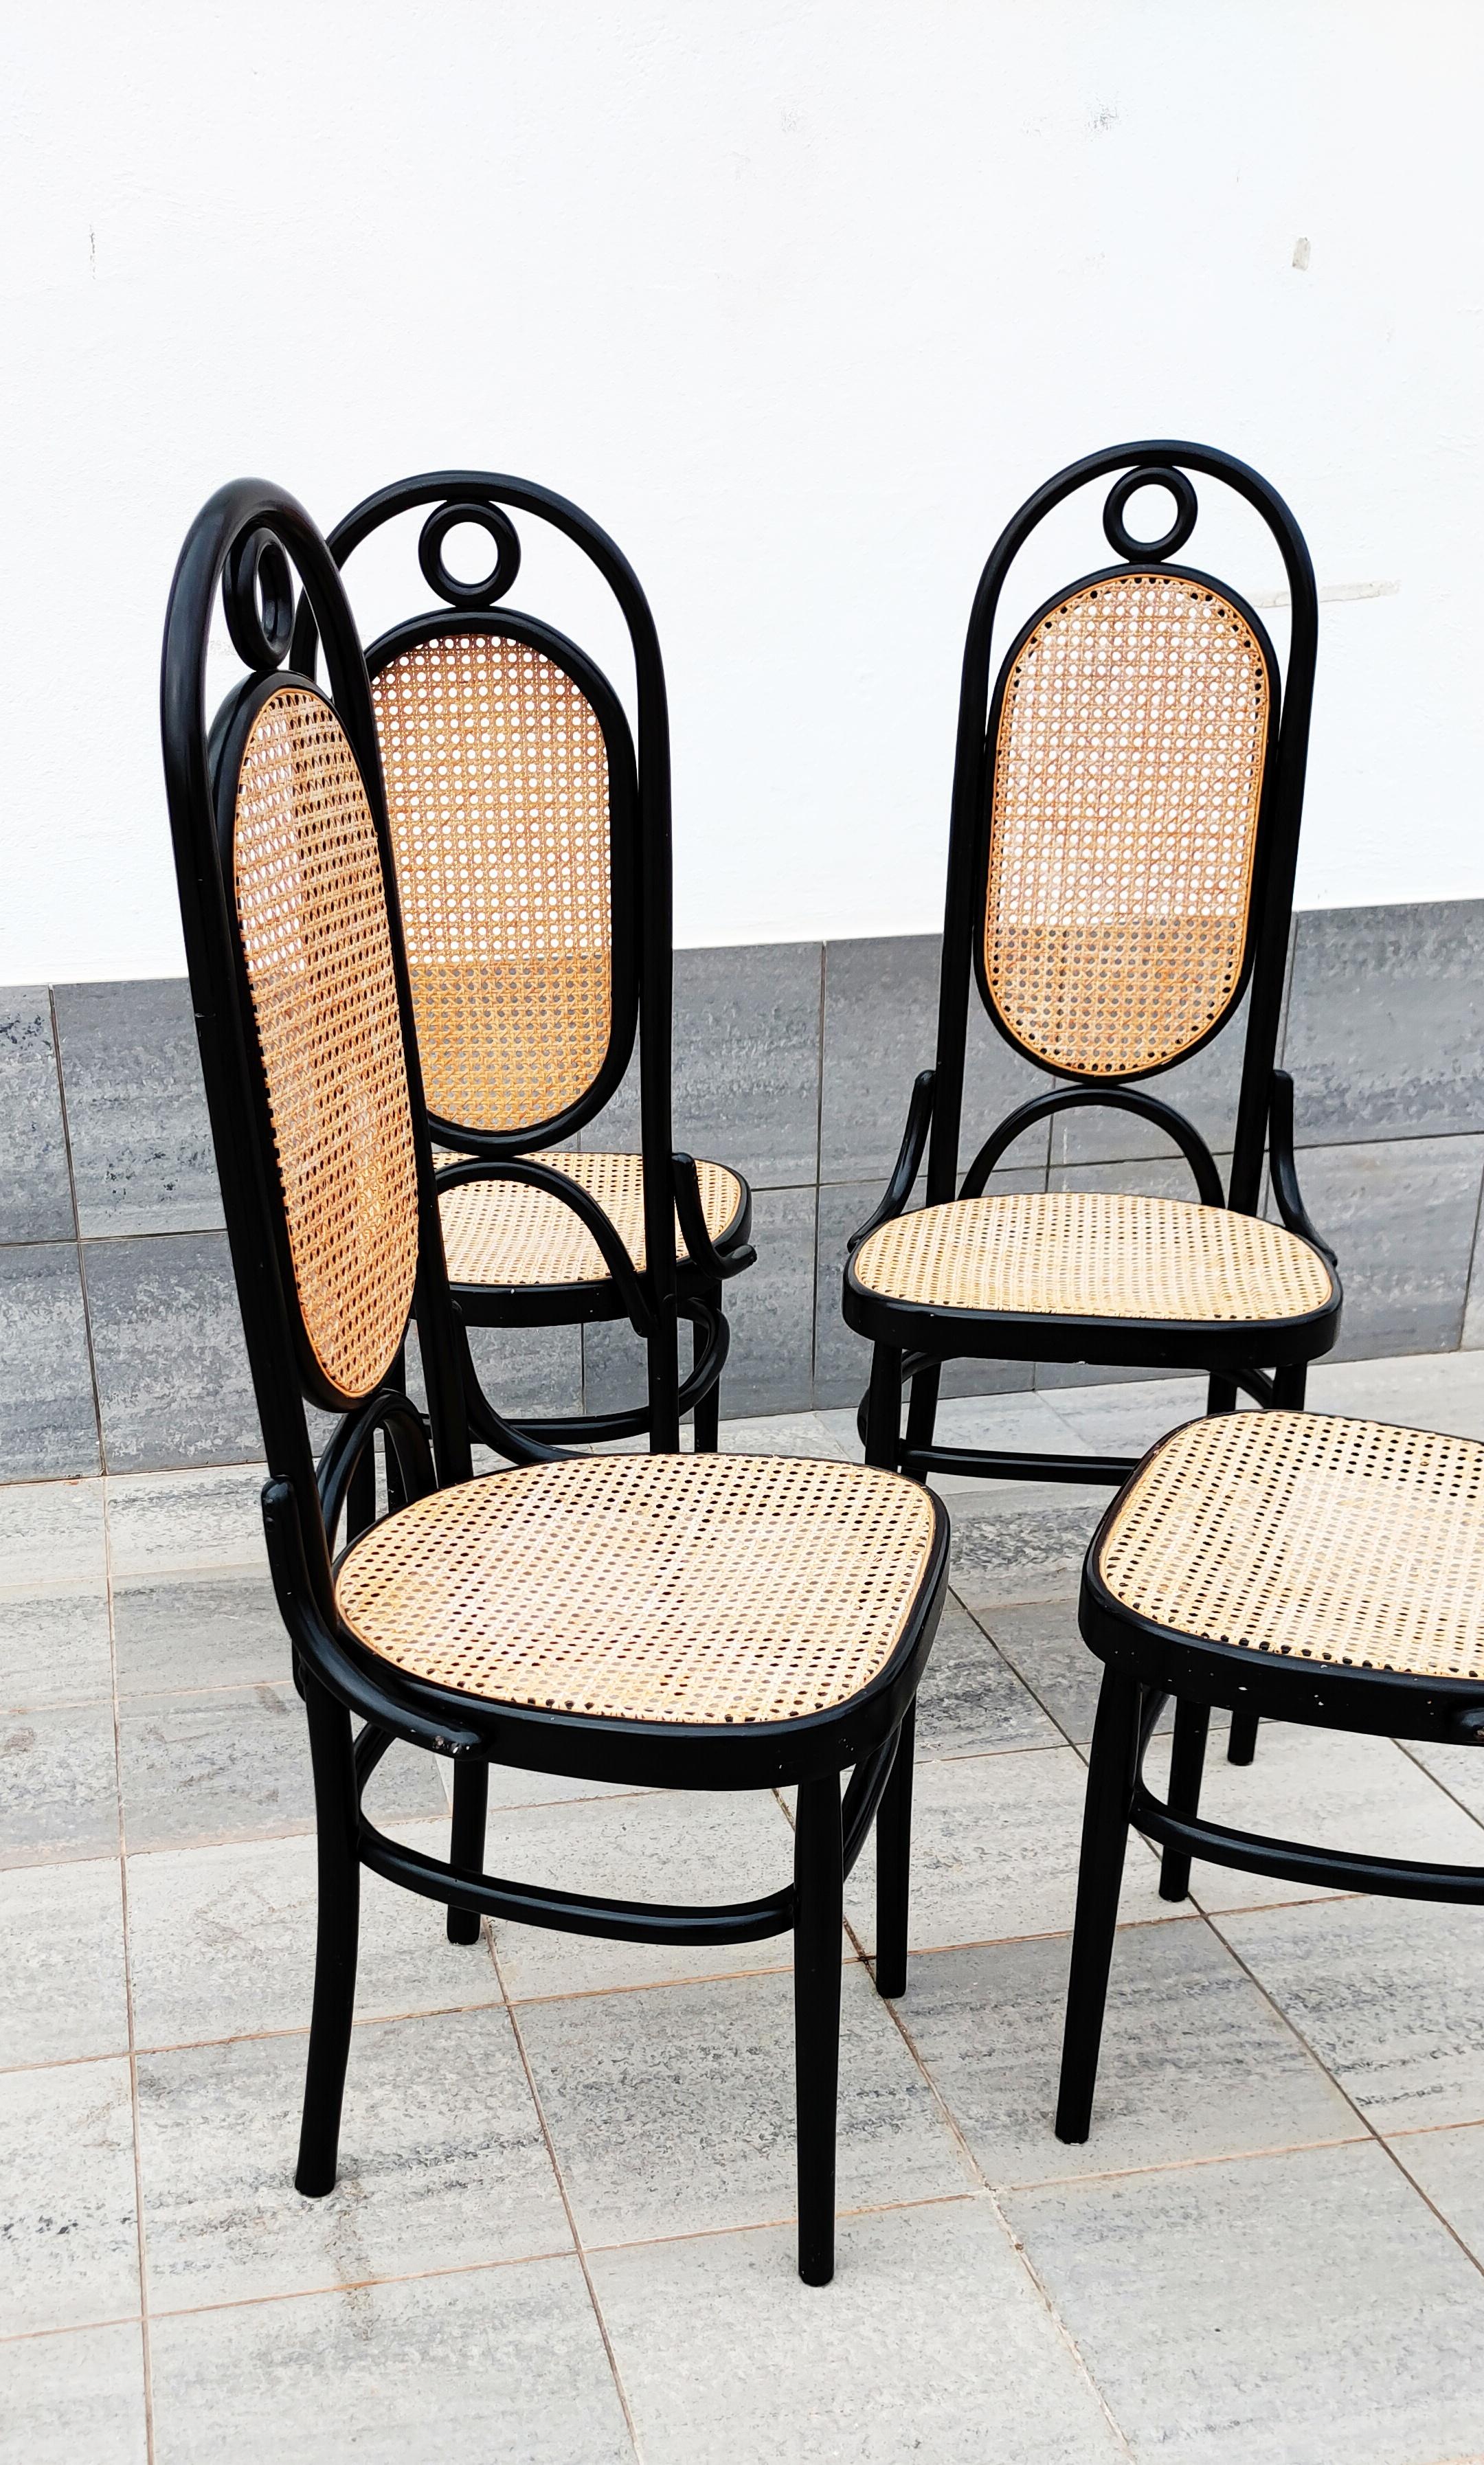 Rare set of 4 black lacquered Thonet N 17 high back dining chairs, manufactured in France in 1960s. In good vintage condition.